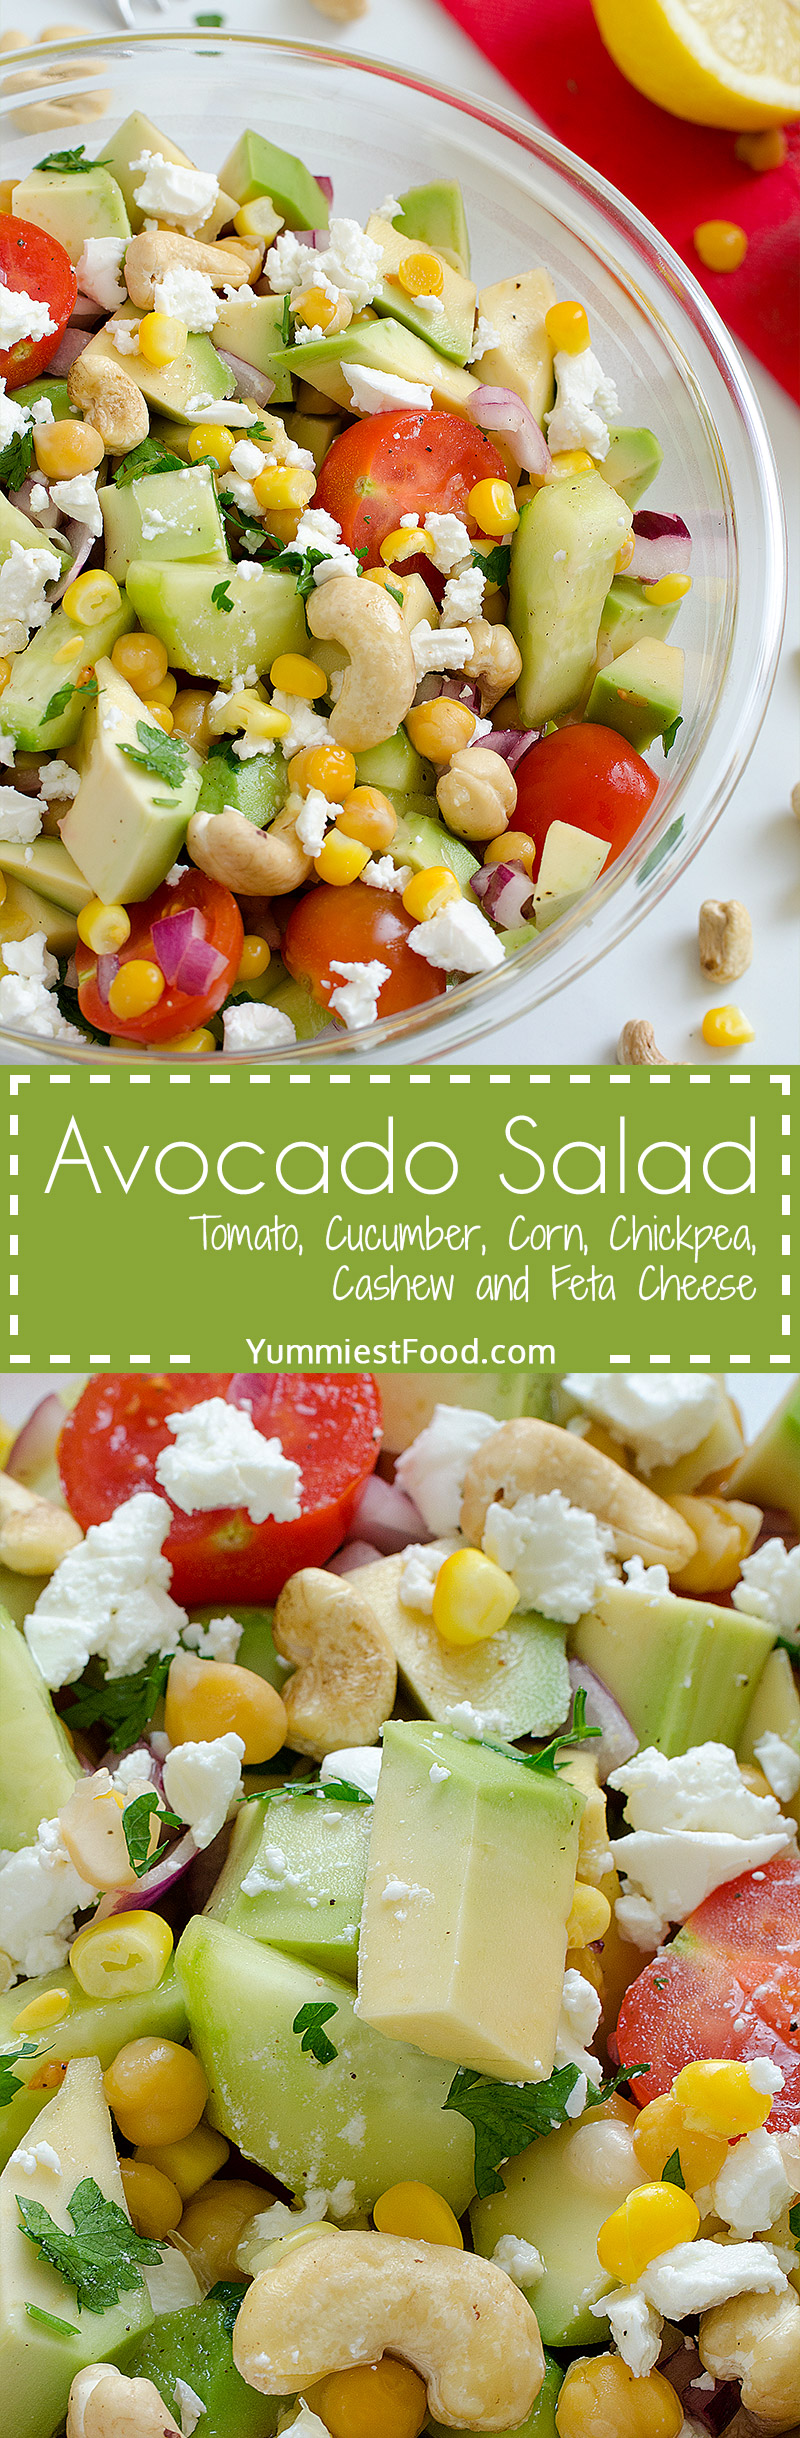 Avocado, Tomato, Cucumber, Corn, Chickpea and Cashew Salad with Feta Cheese - Light, full of healthy ingredients and perfectly refreshing.